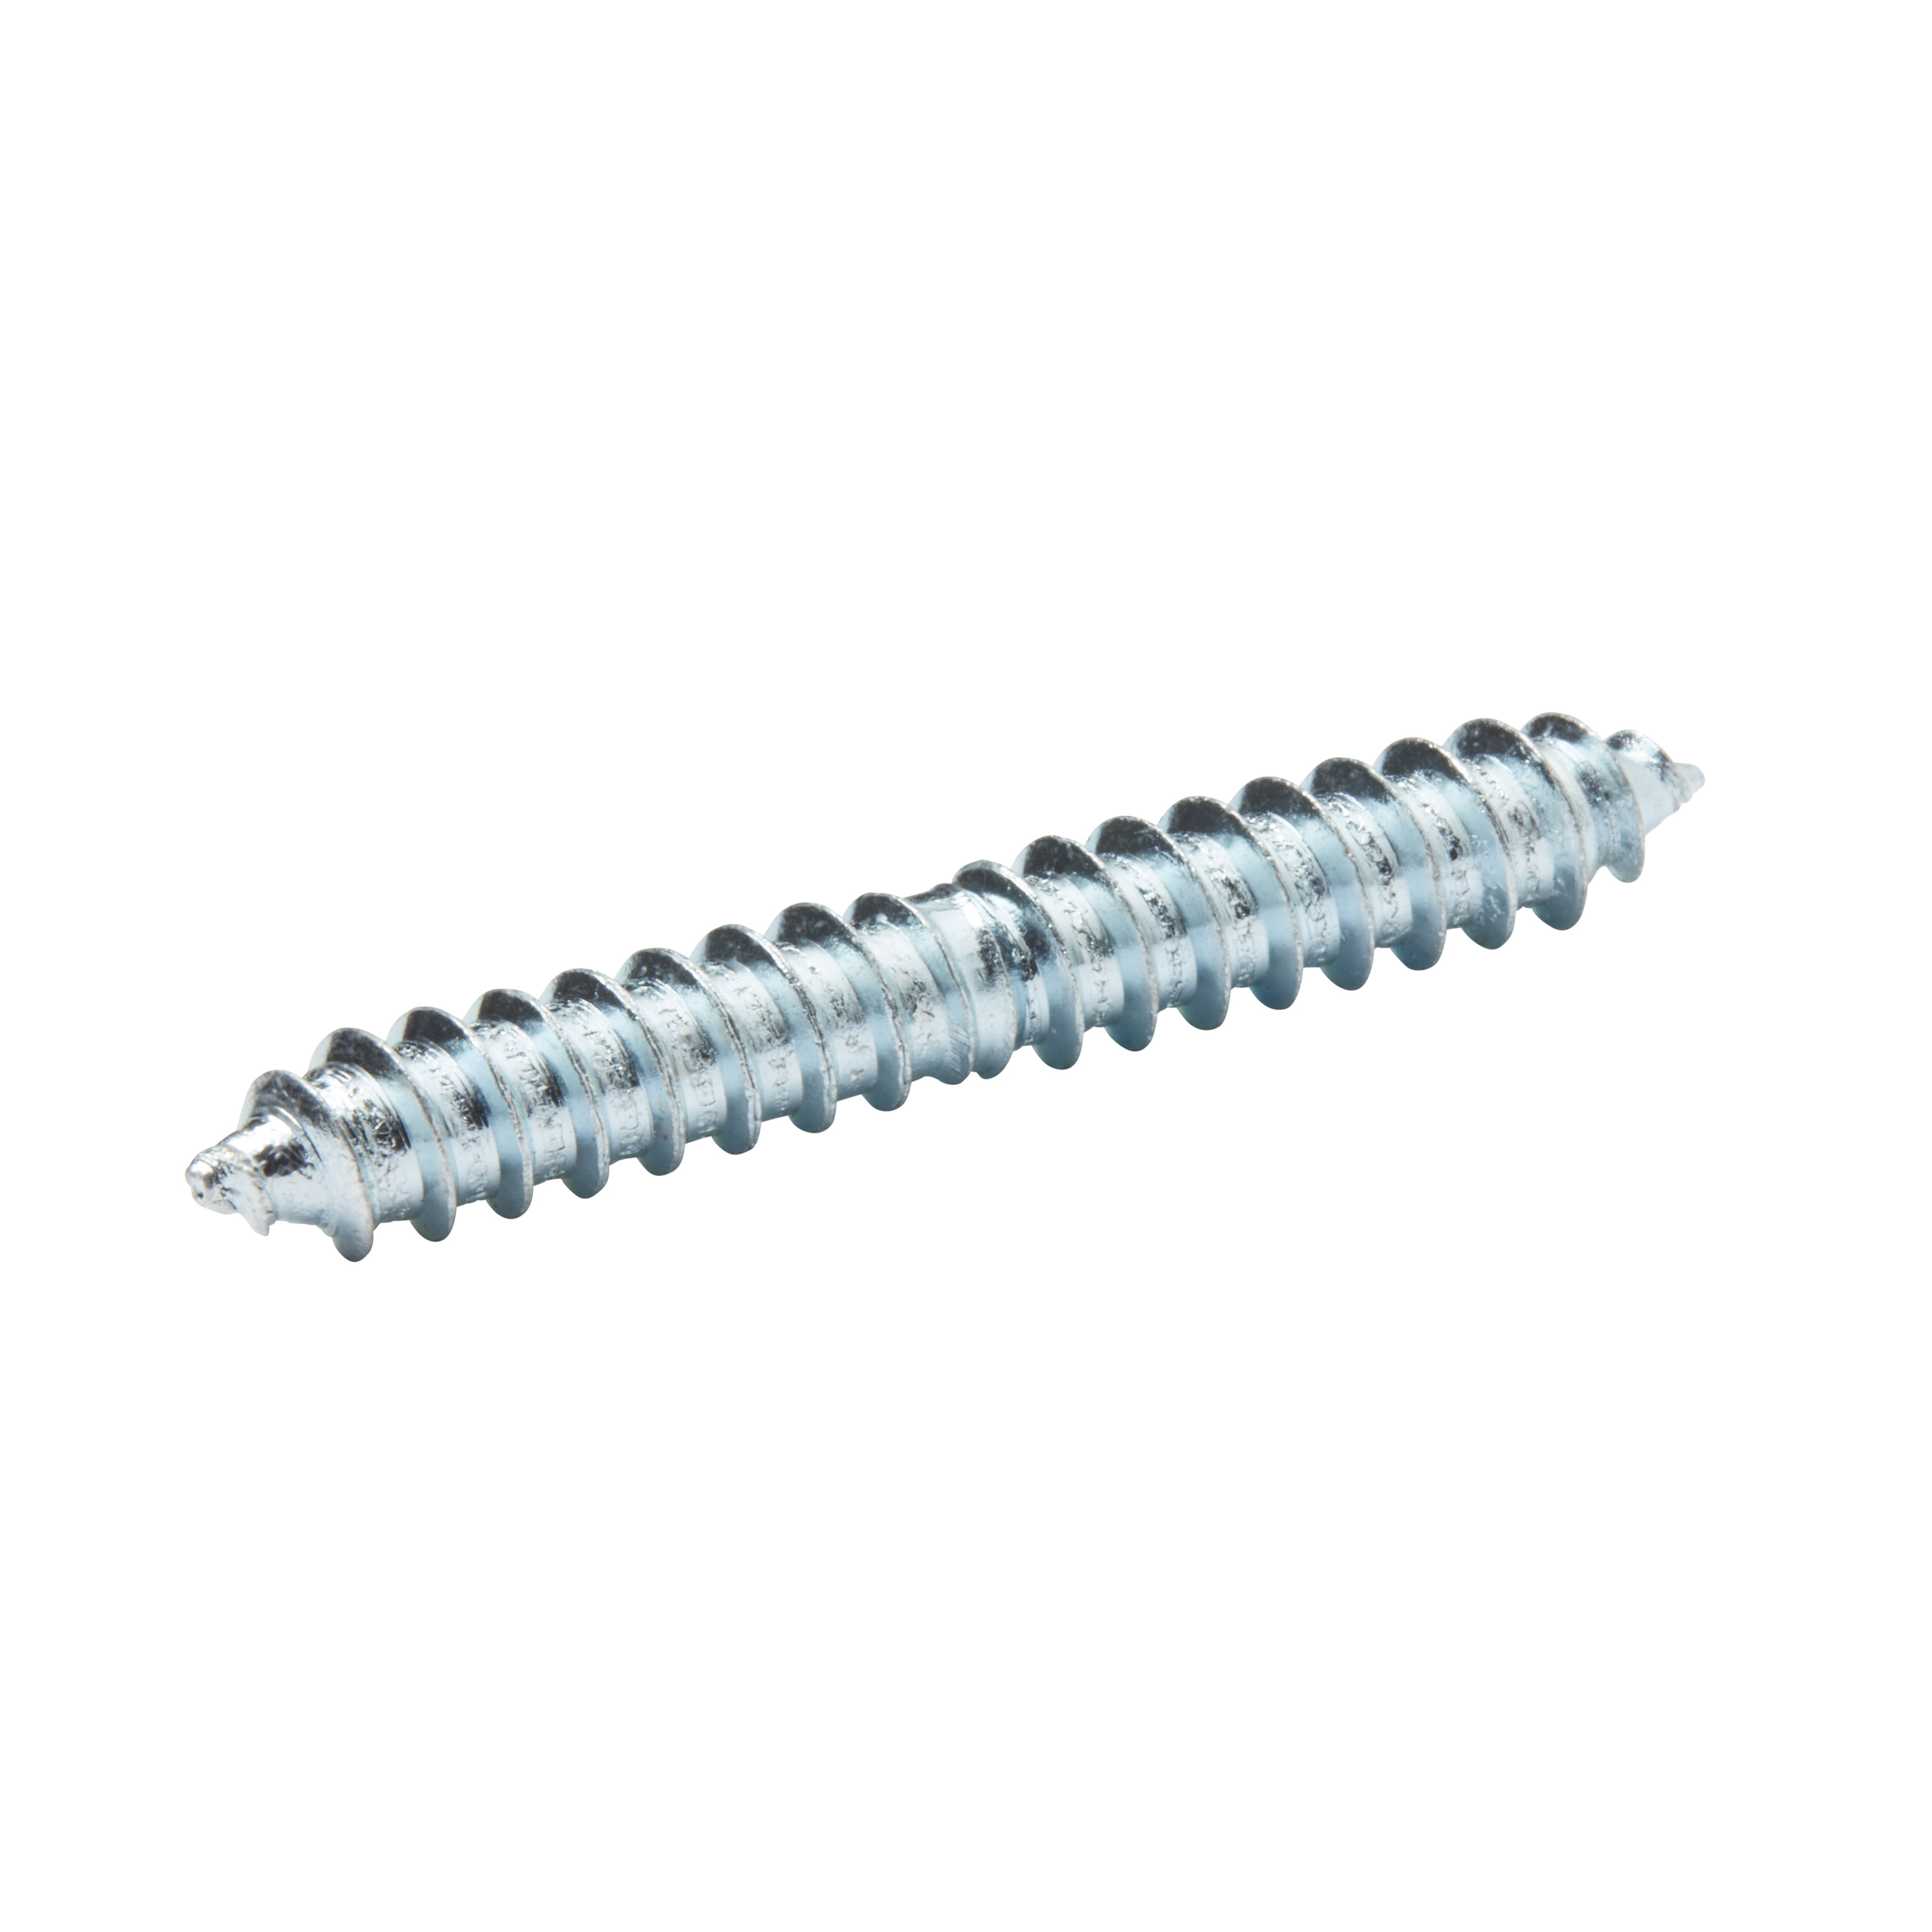 Diall Zinc-plated Carbon steel Dowel screw (Dia)8mm (L)60mm, Pack of 5